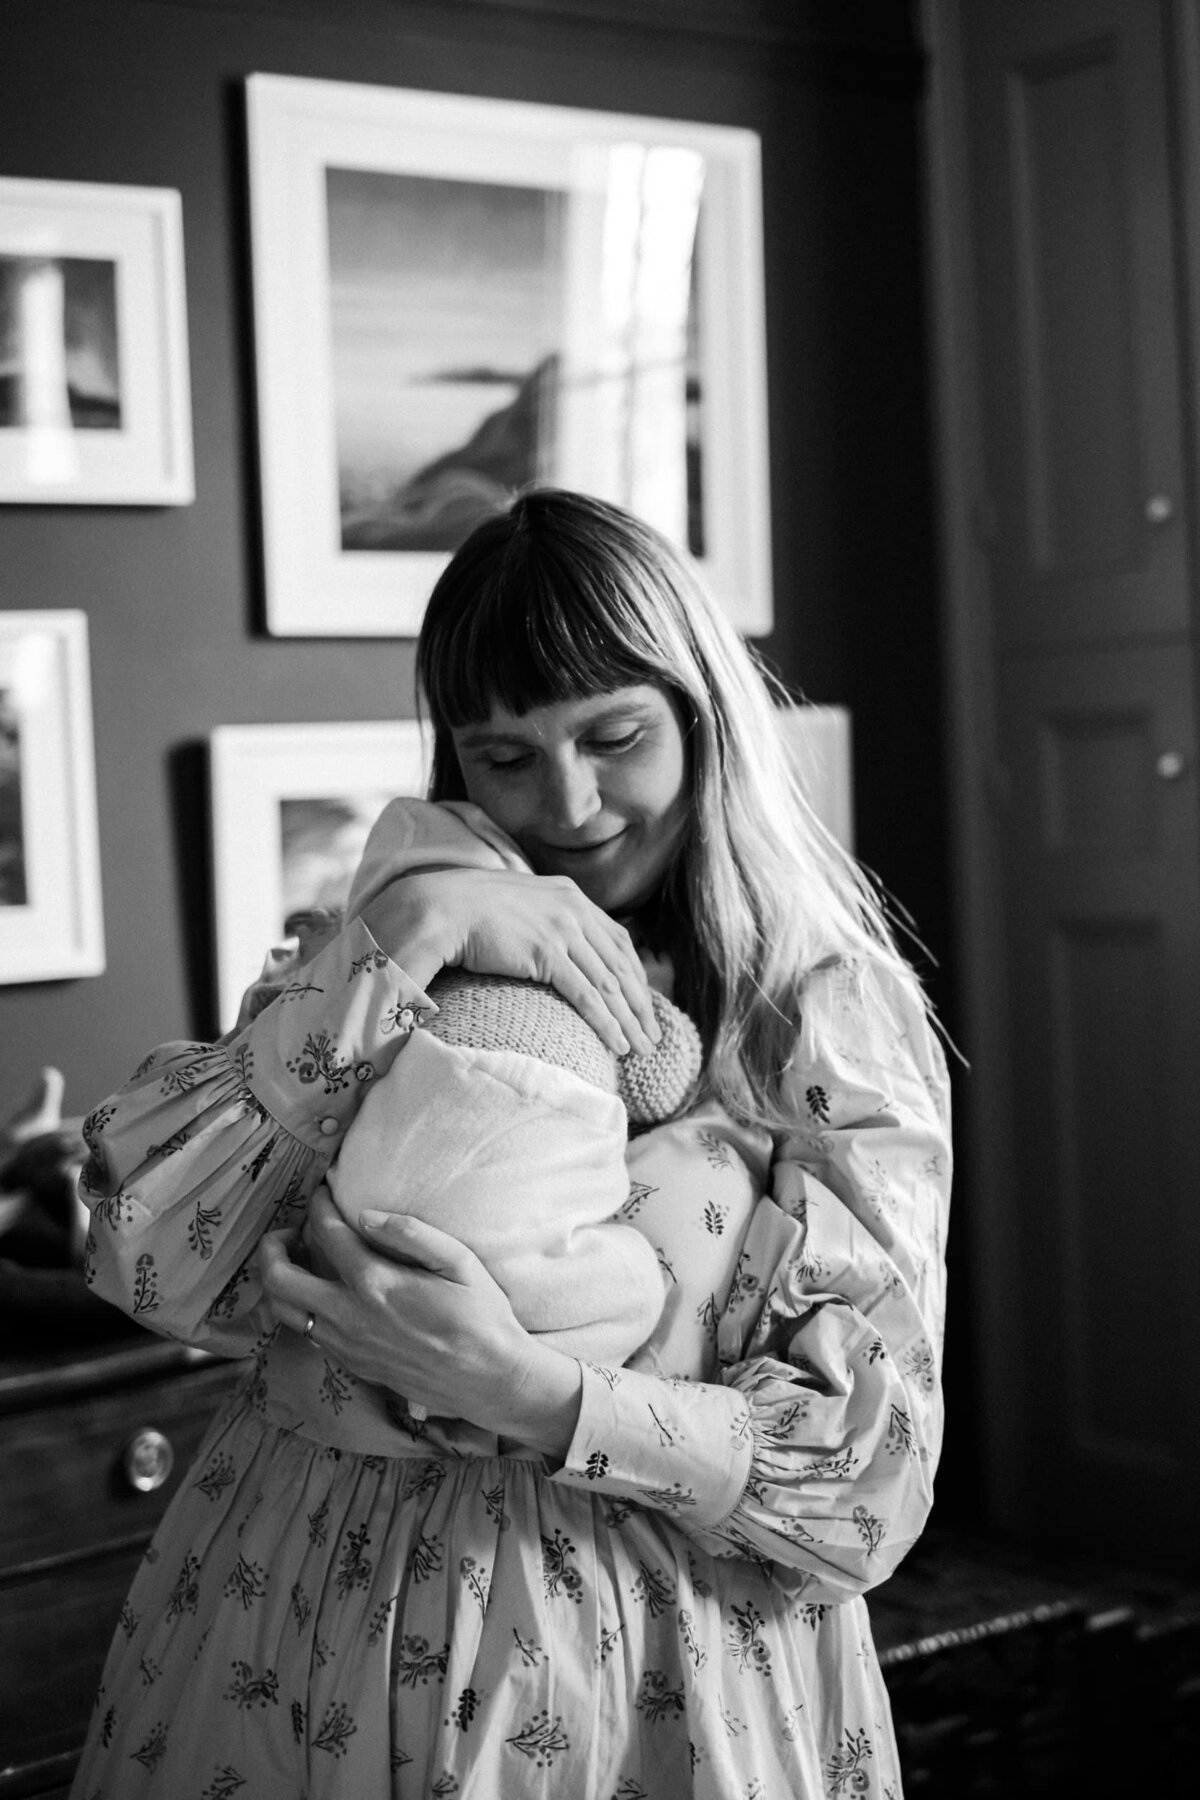 Mum cuddles her newborn baby standing in front of wall full of framed artwork